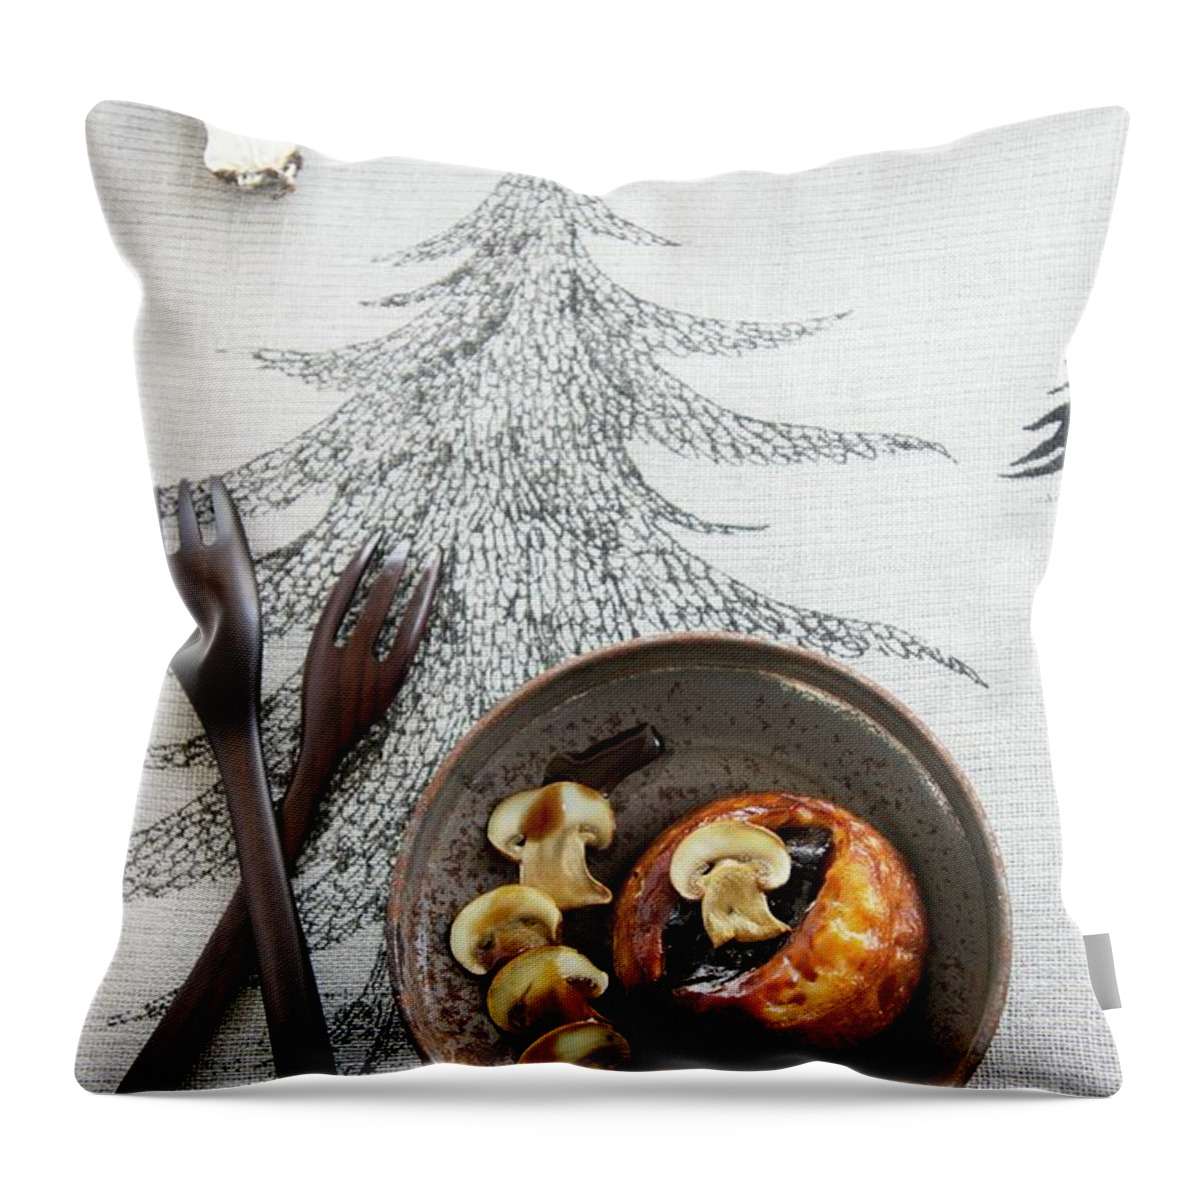 Ip_11270914 Throw Pillow featuring the photograph Muffin With Prunes And Mushroom Sauce christmas by Martina Schindler